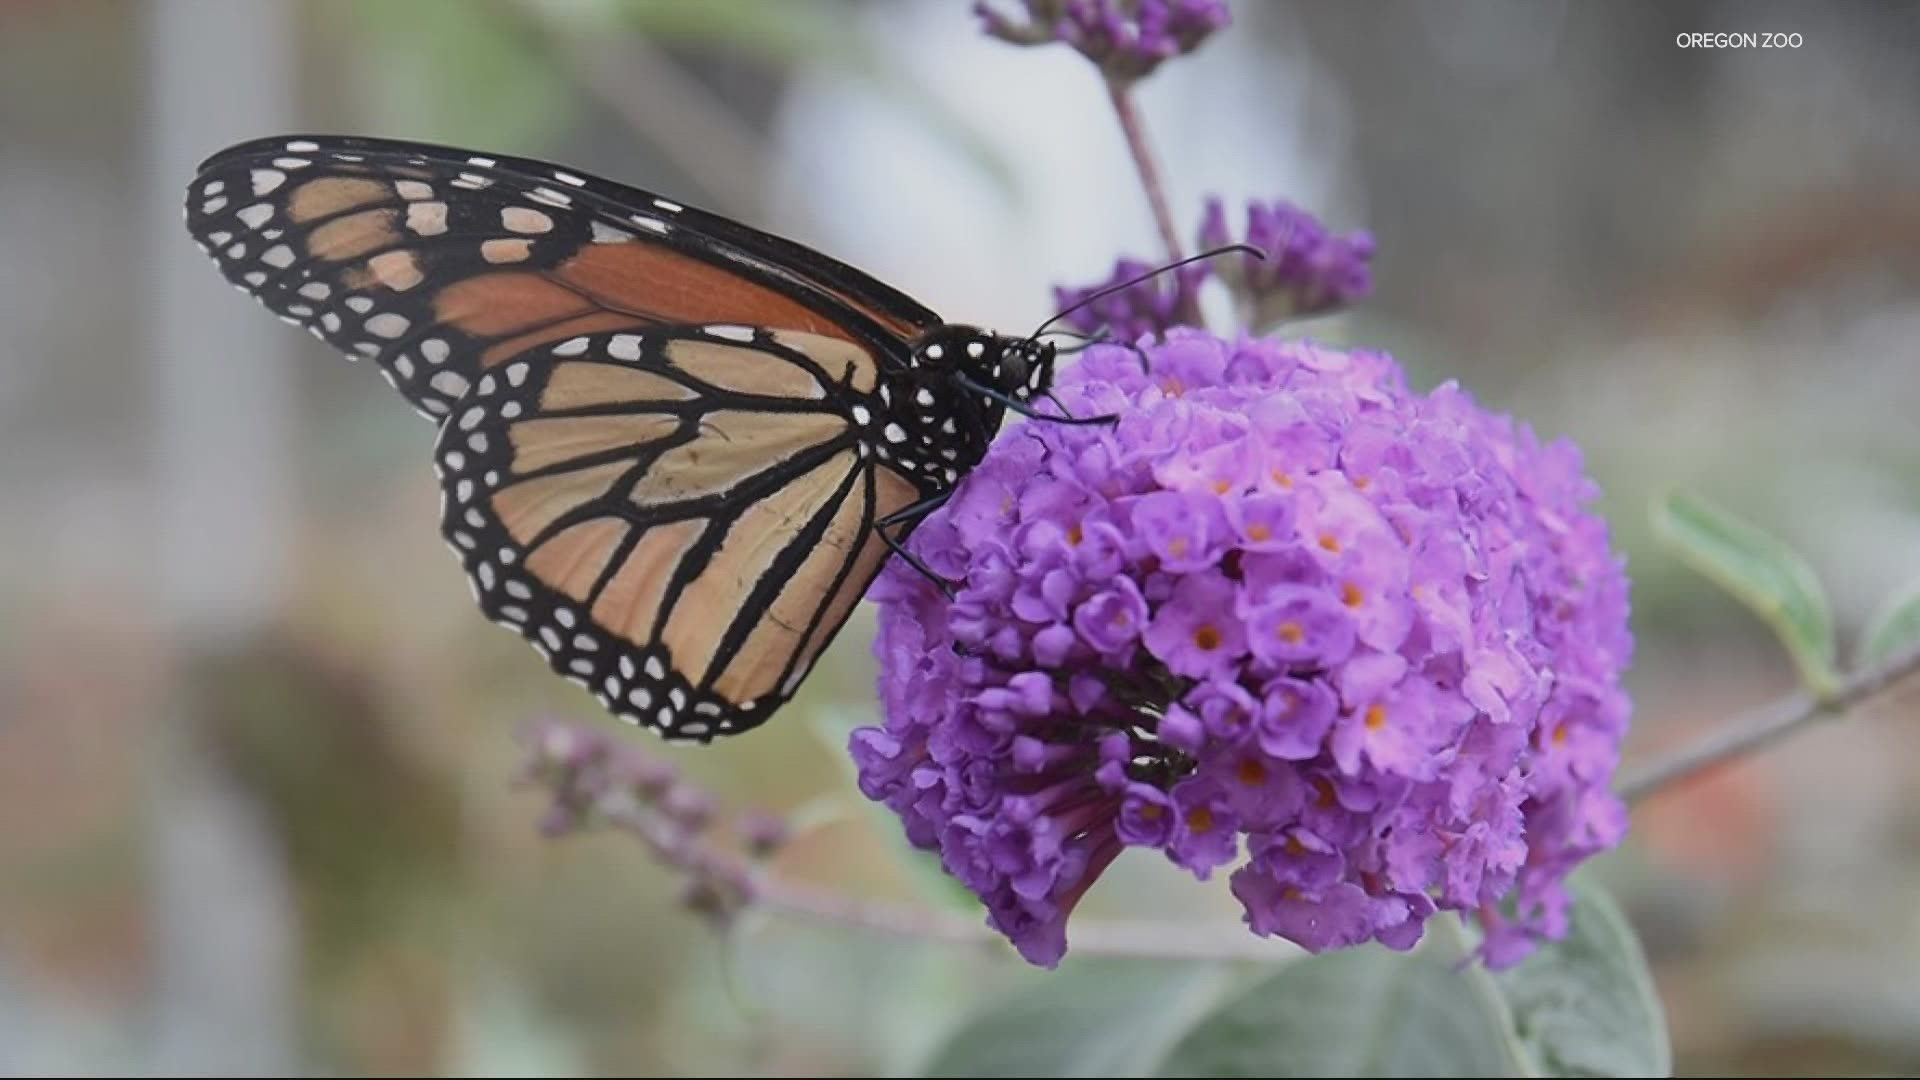 The Oregon silverspot butterfly has slowly been dying off for more than four decades. KGW's Joe Raineri reports on the zoo's efforts to save the species.